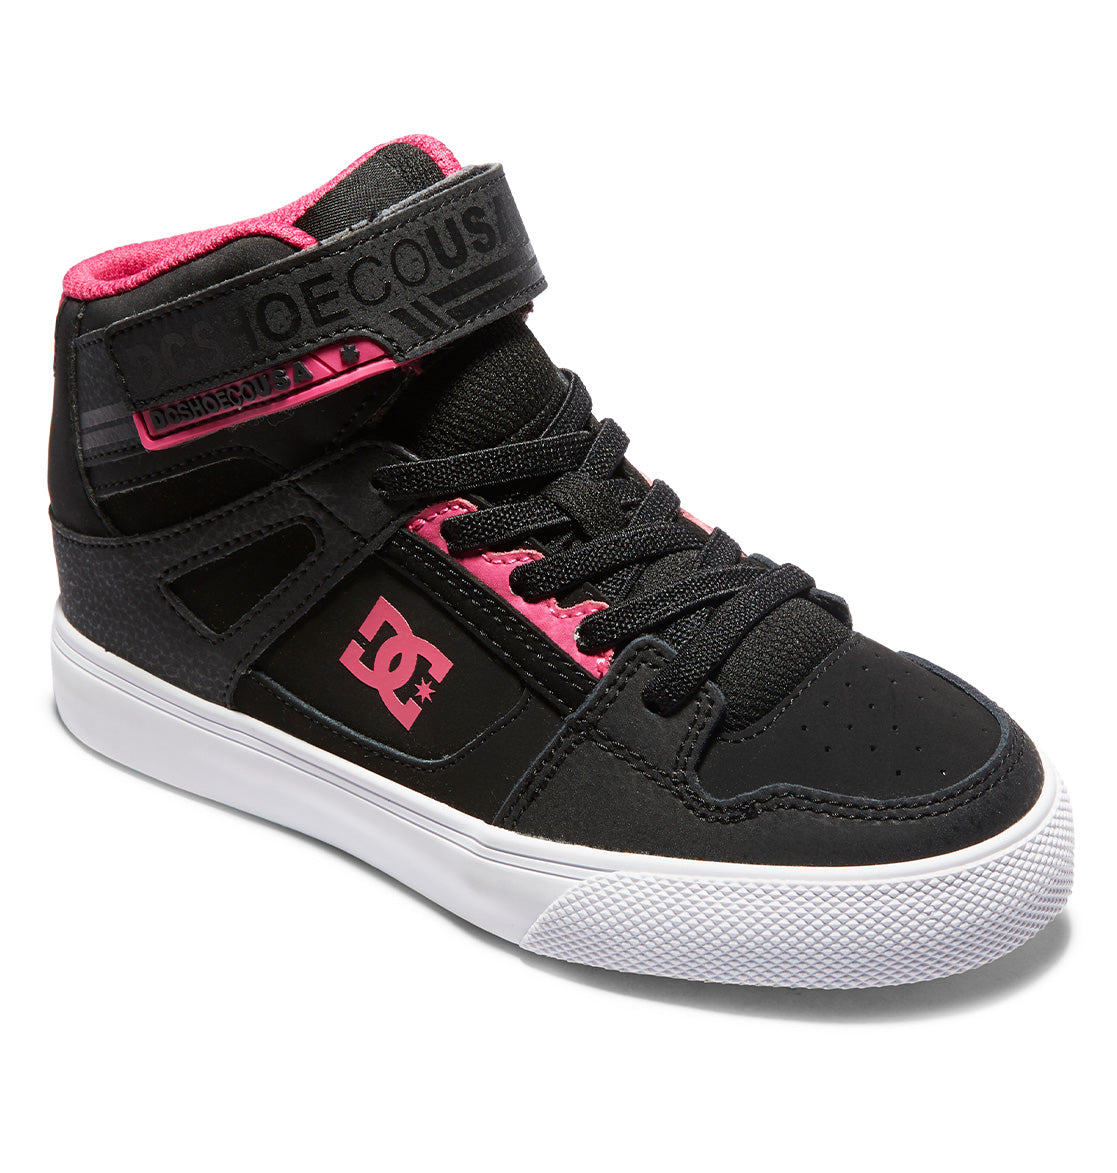 Kids' Pure High Elastic Lace High-Top Shoes - Black/Pink/Black